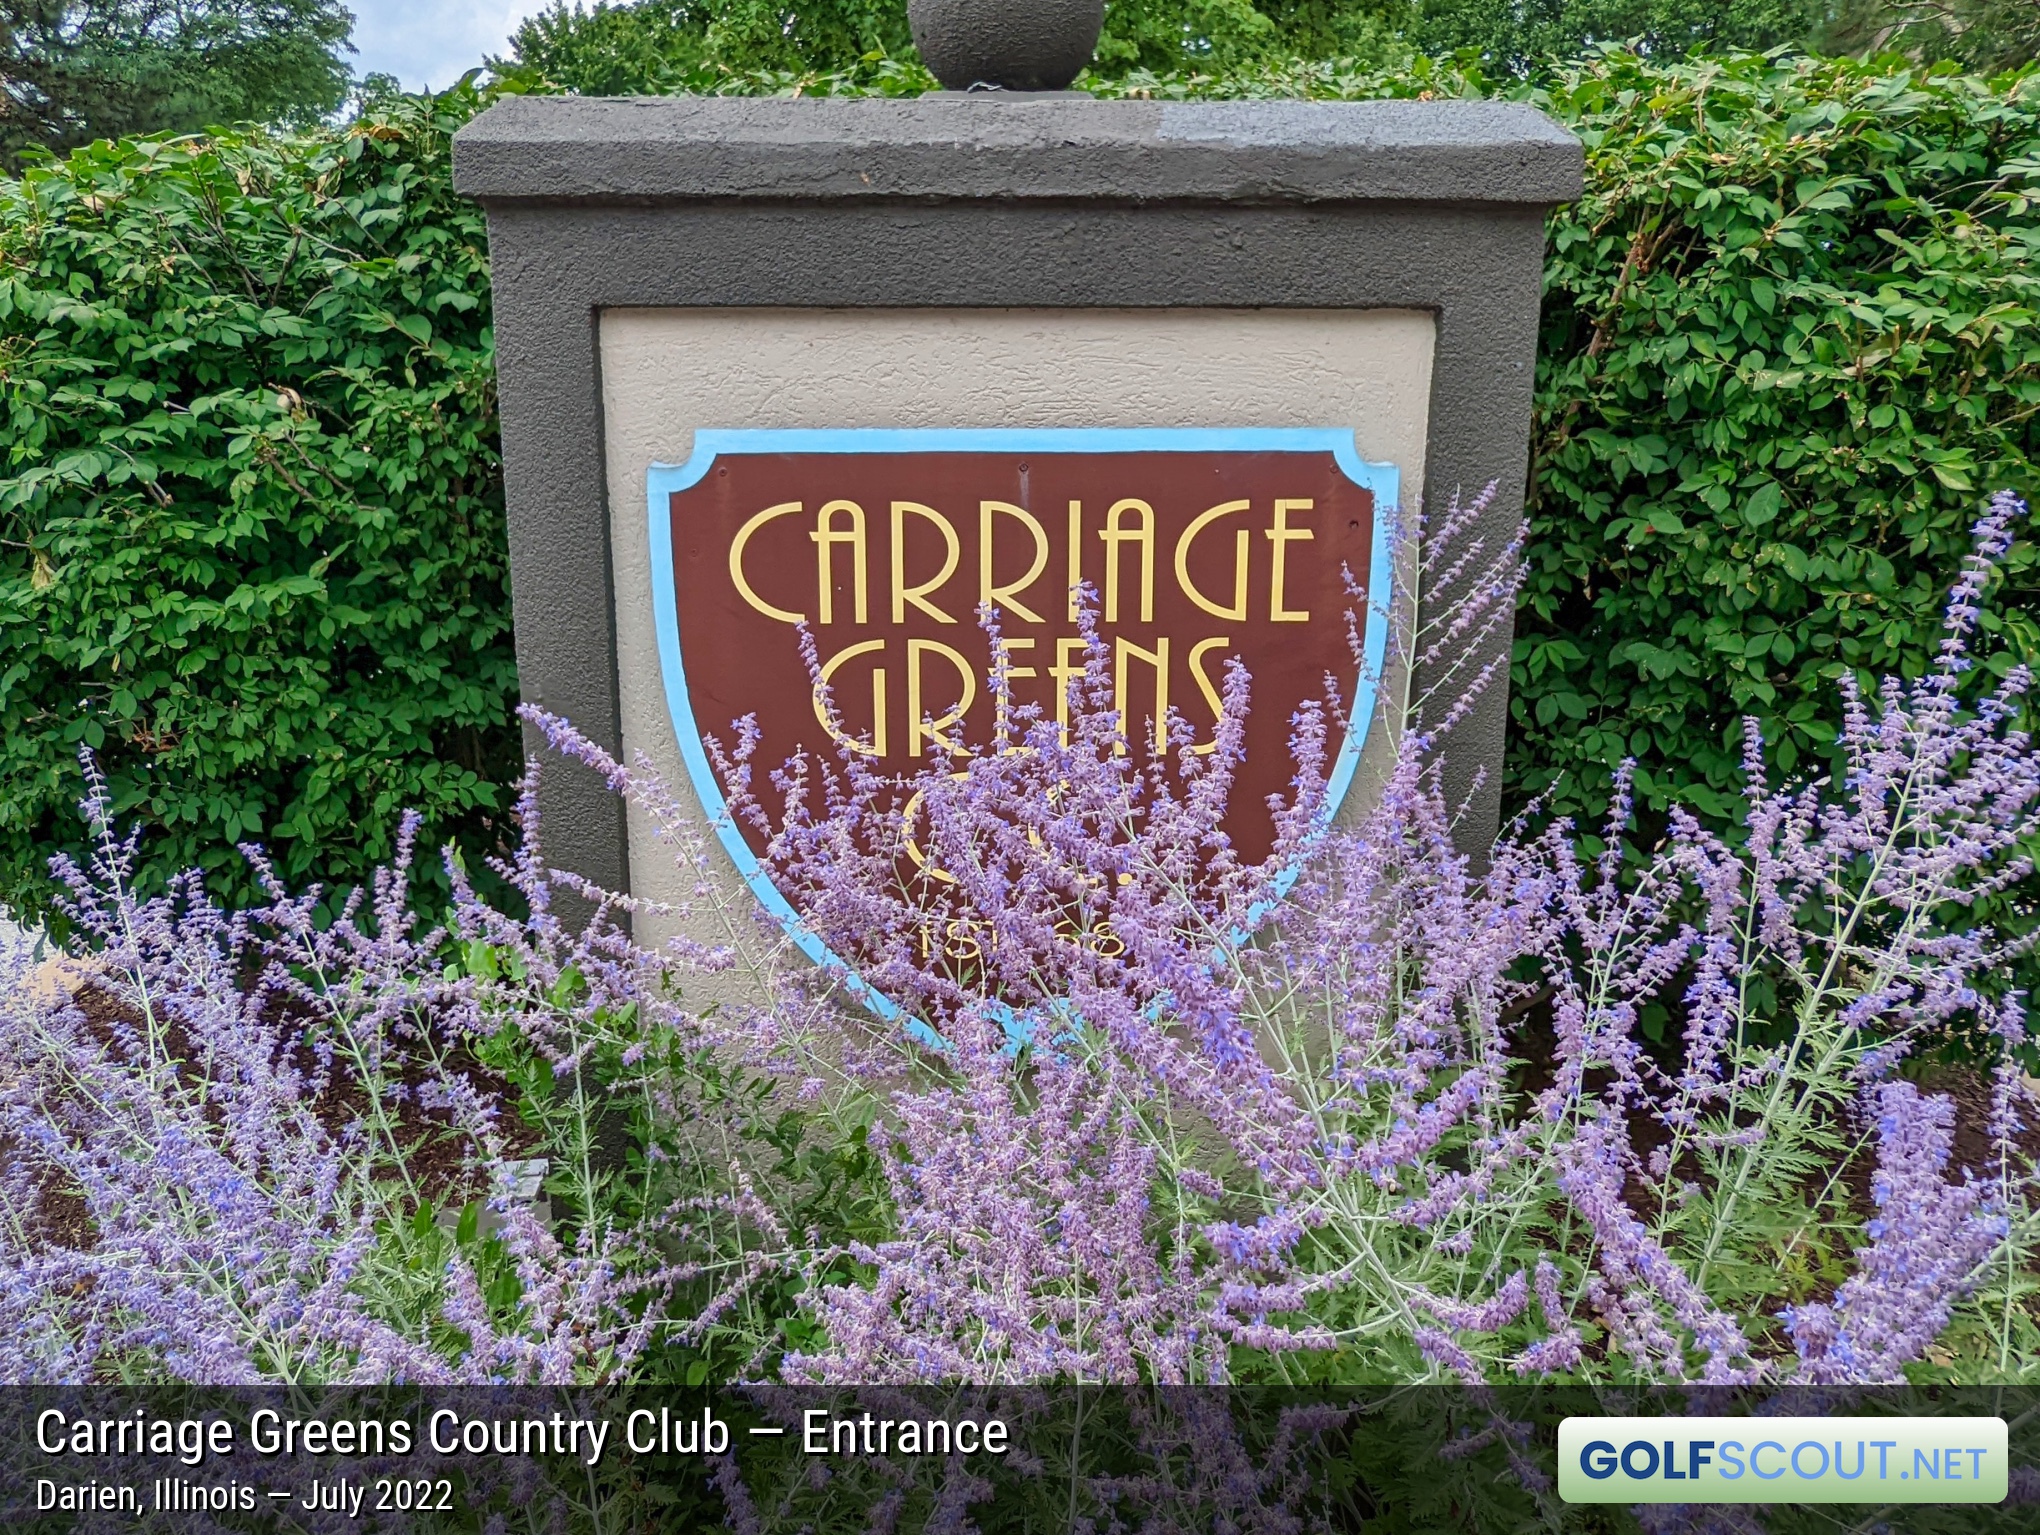 Sign at the entrance to Carriage Greens Country Club